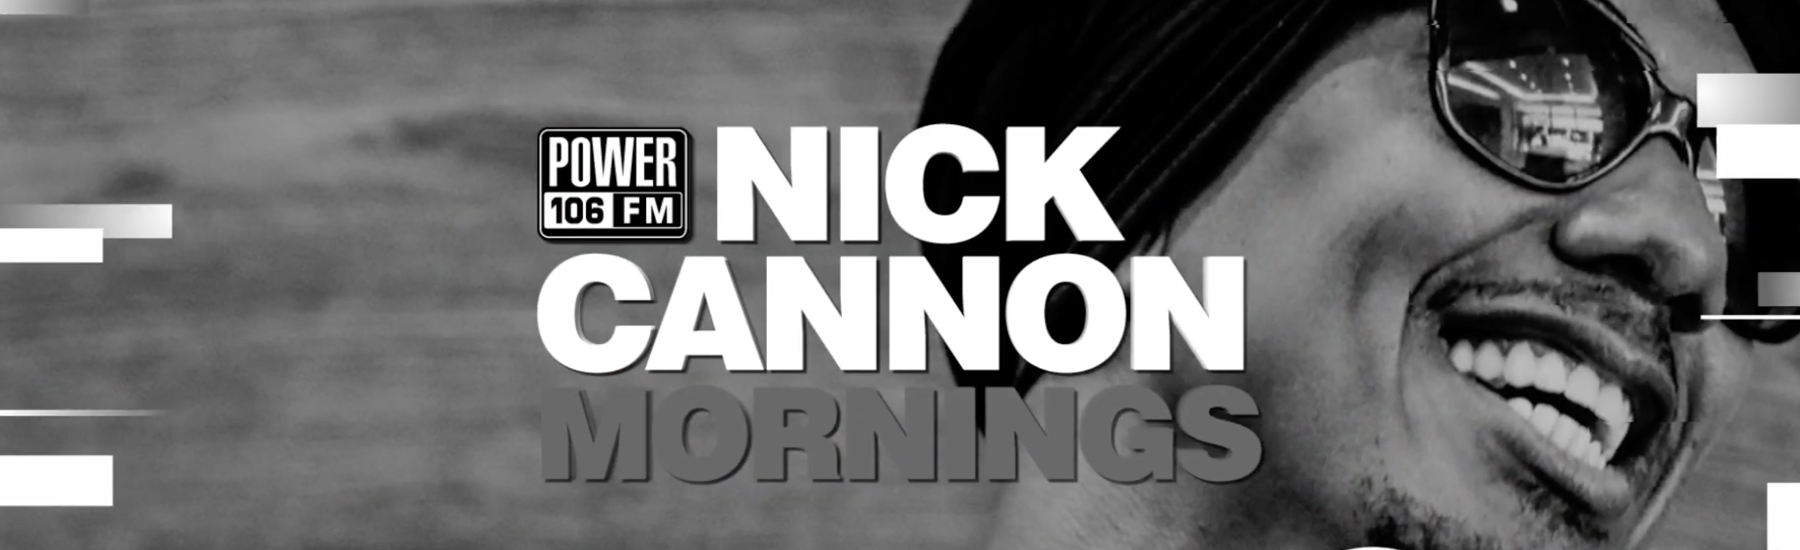 Wake that a** up with Nick Cannon Mornings on Power 106!